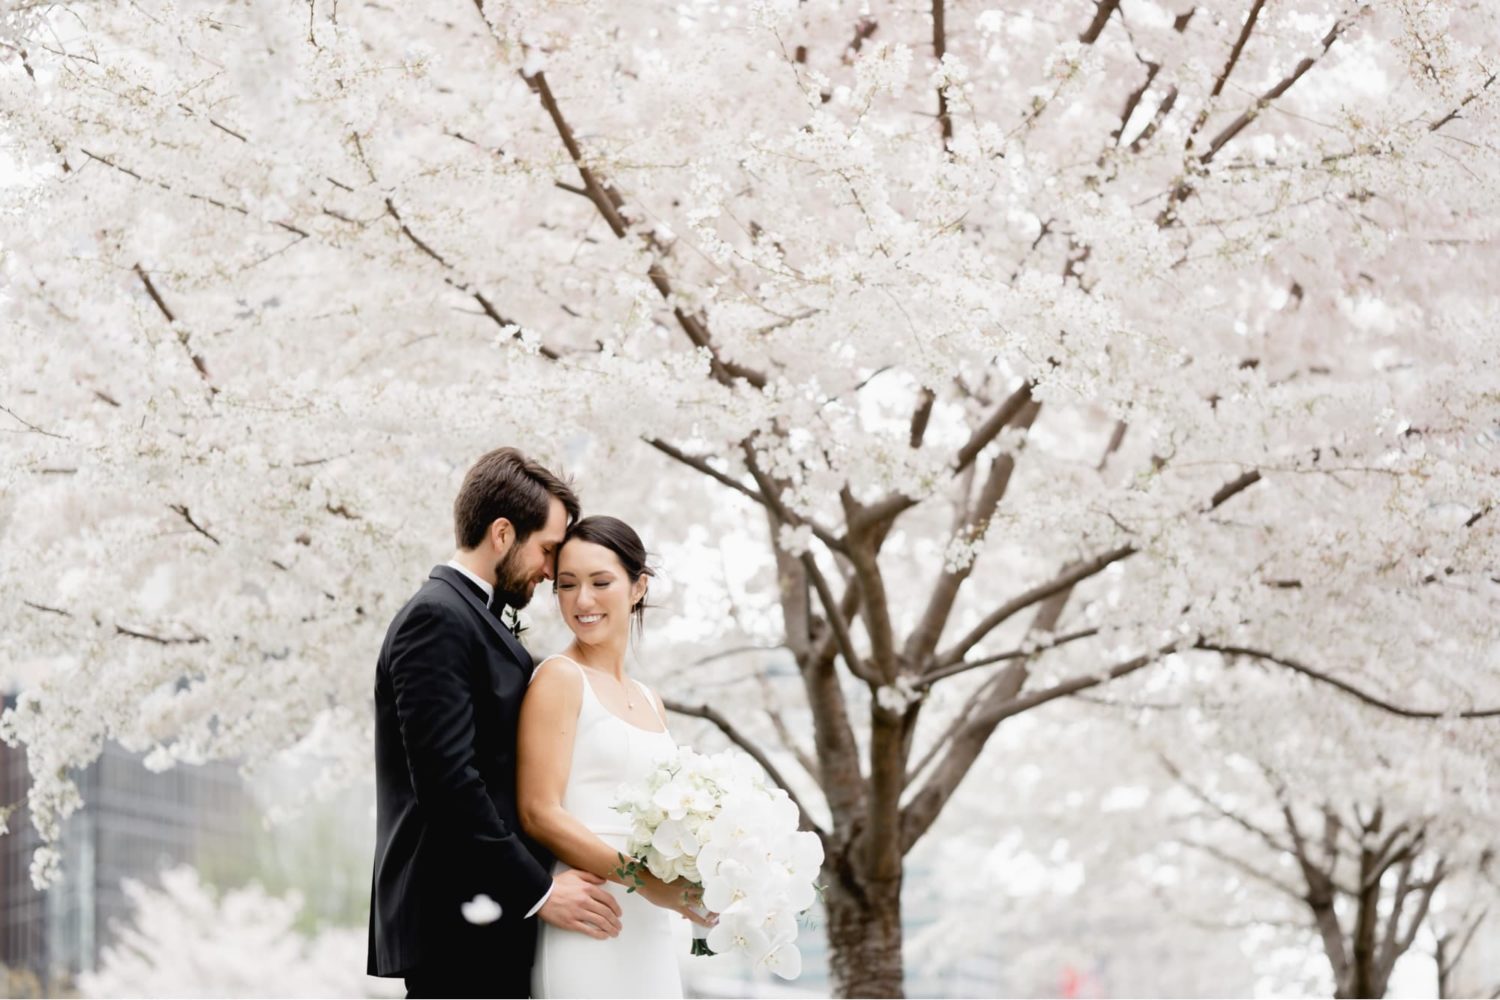 Stunning bride and groom portraits during spring blooms